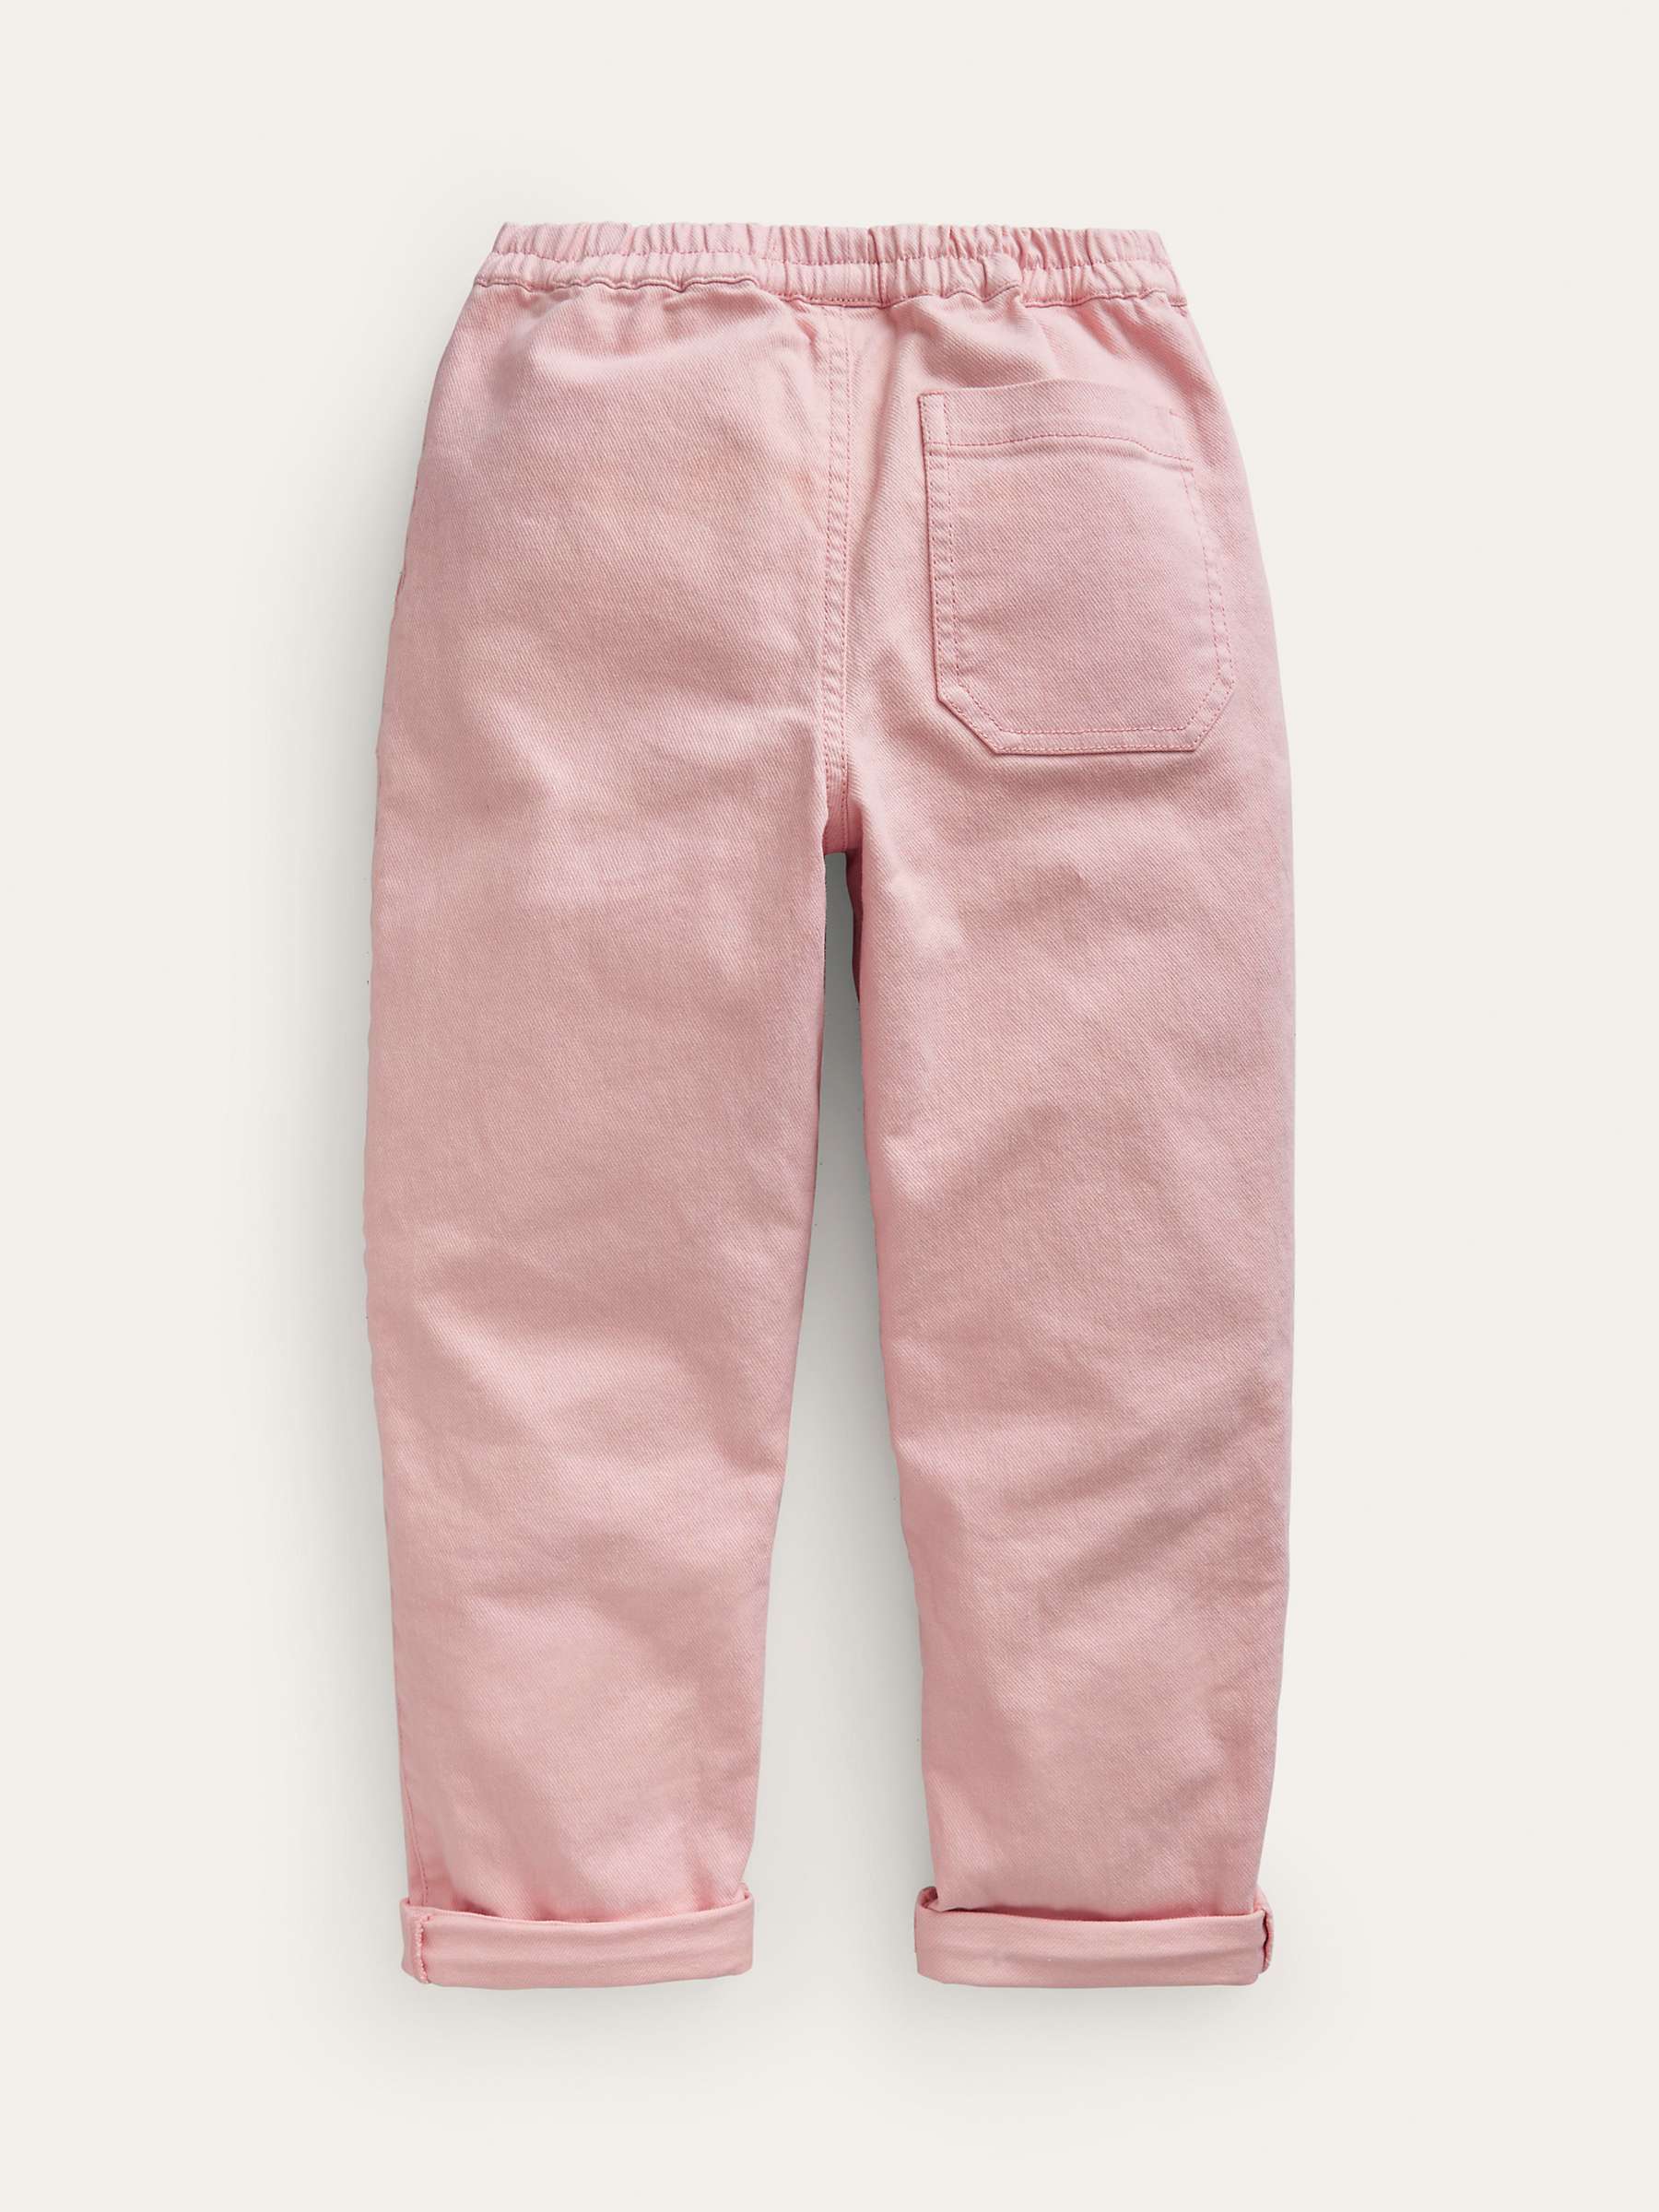 Buy Mini Boden Kids' Floral Embroidered Pull On Trousers, Dusty Pink Online at johnlewis.com